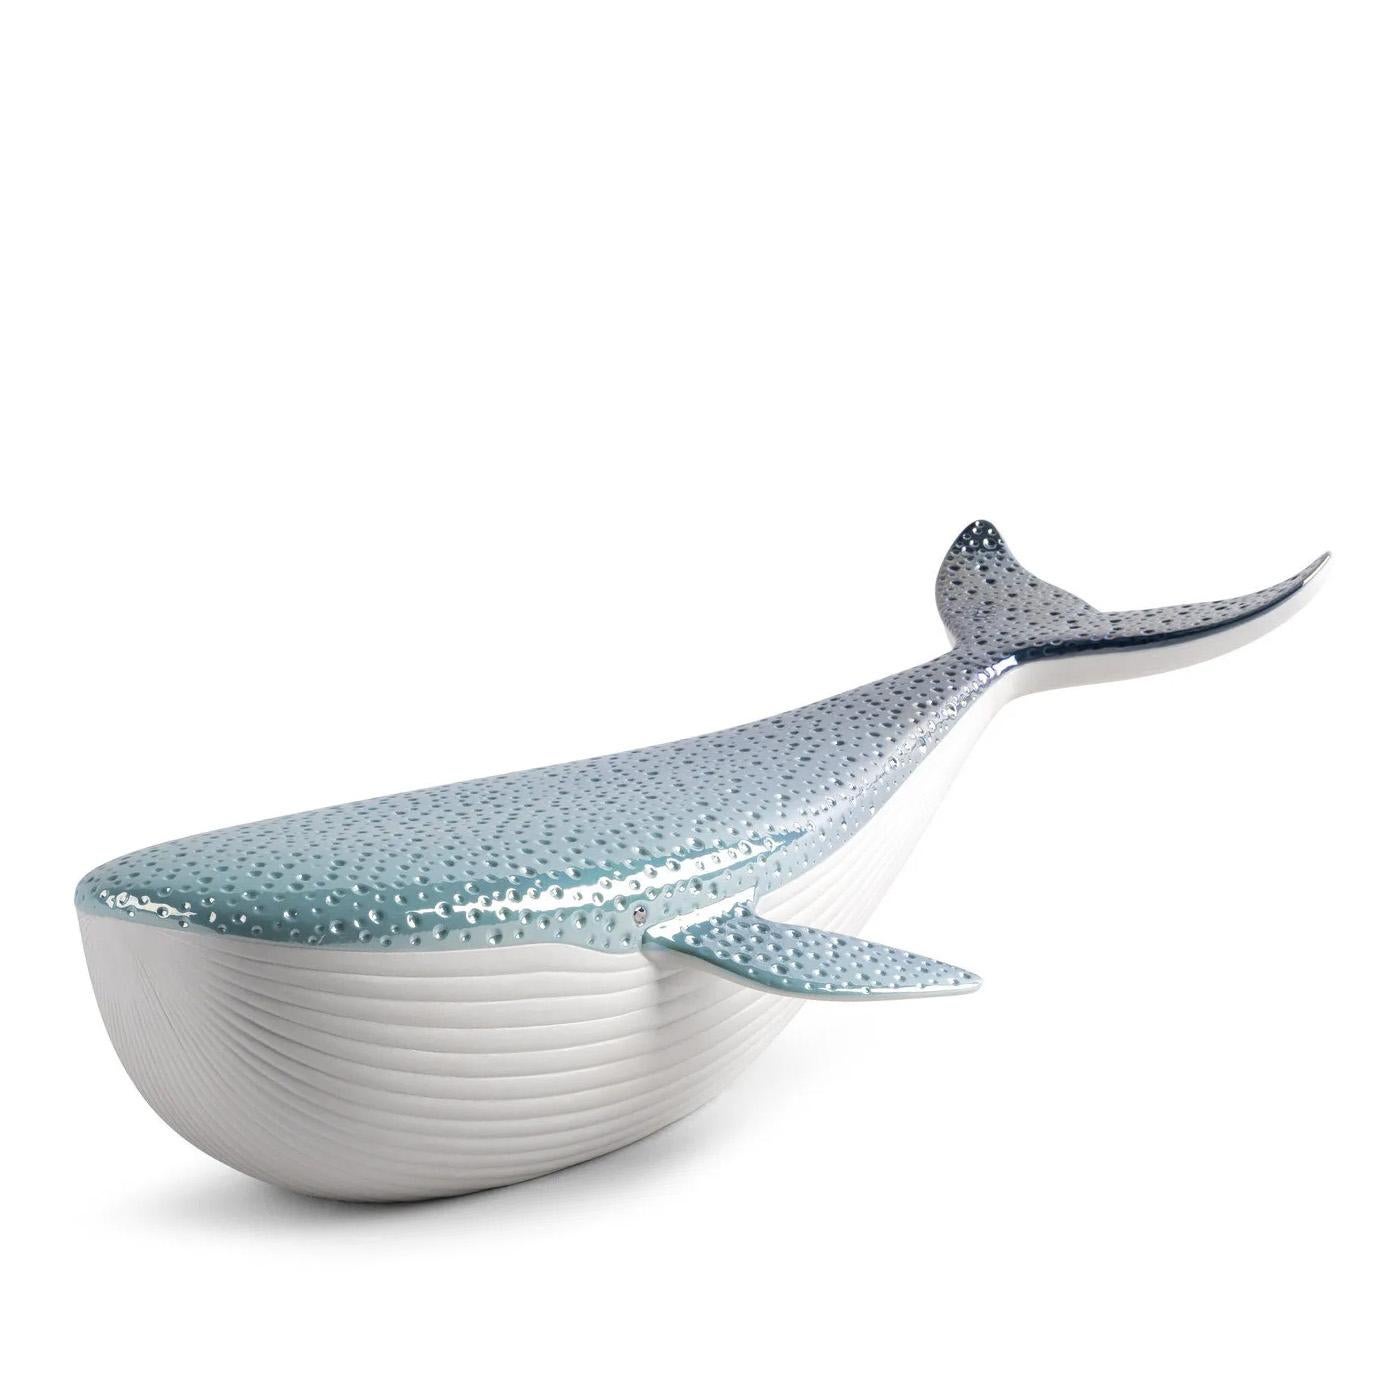 Sculpture Blue Whale with all structure in porcelain 
in matte finish and in glazed metallic lustrous finish.